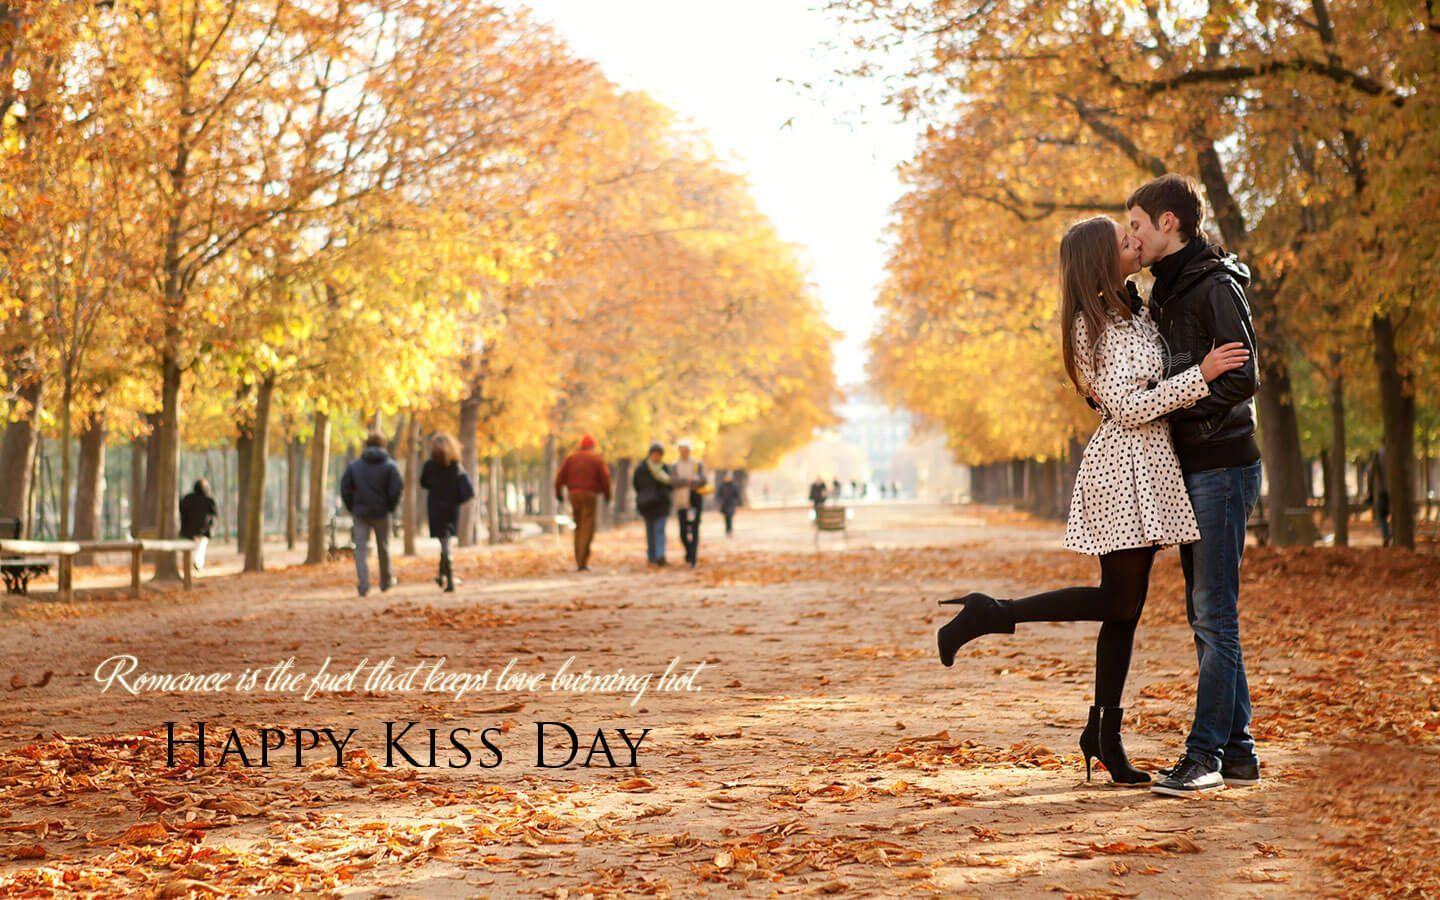 Kiss Day Image 2017. Happy Kiss Day SMS, Quotes, Wishes 2017